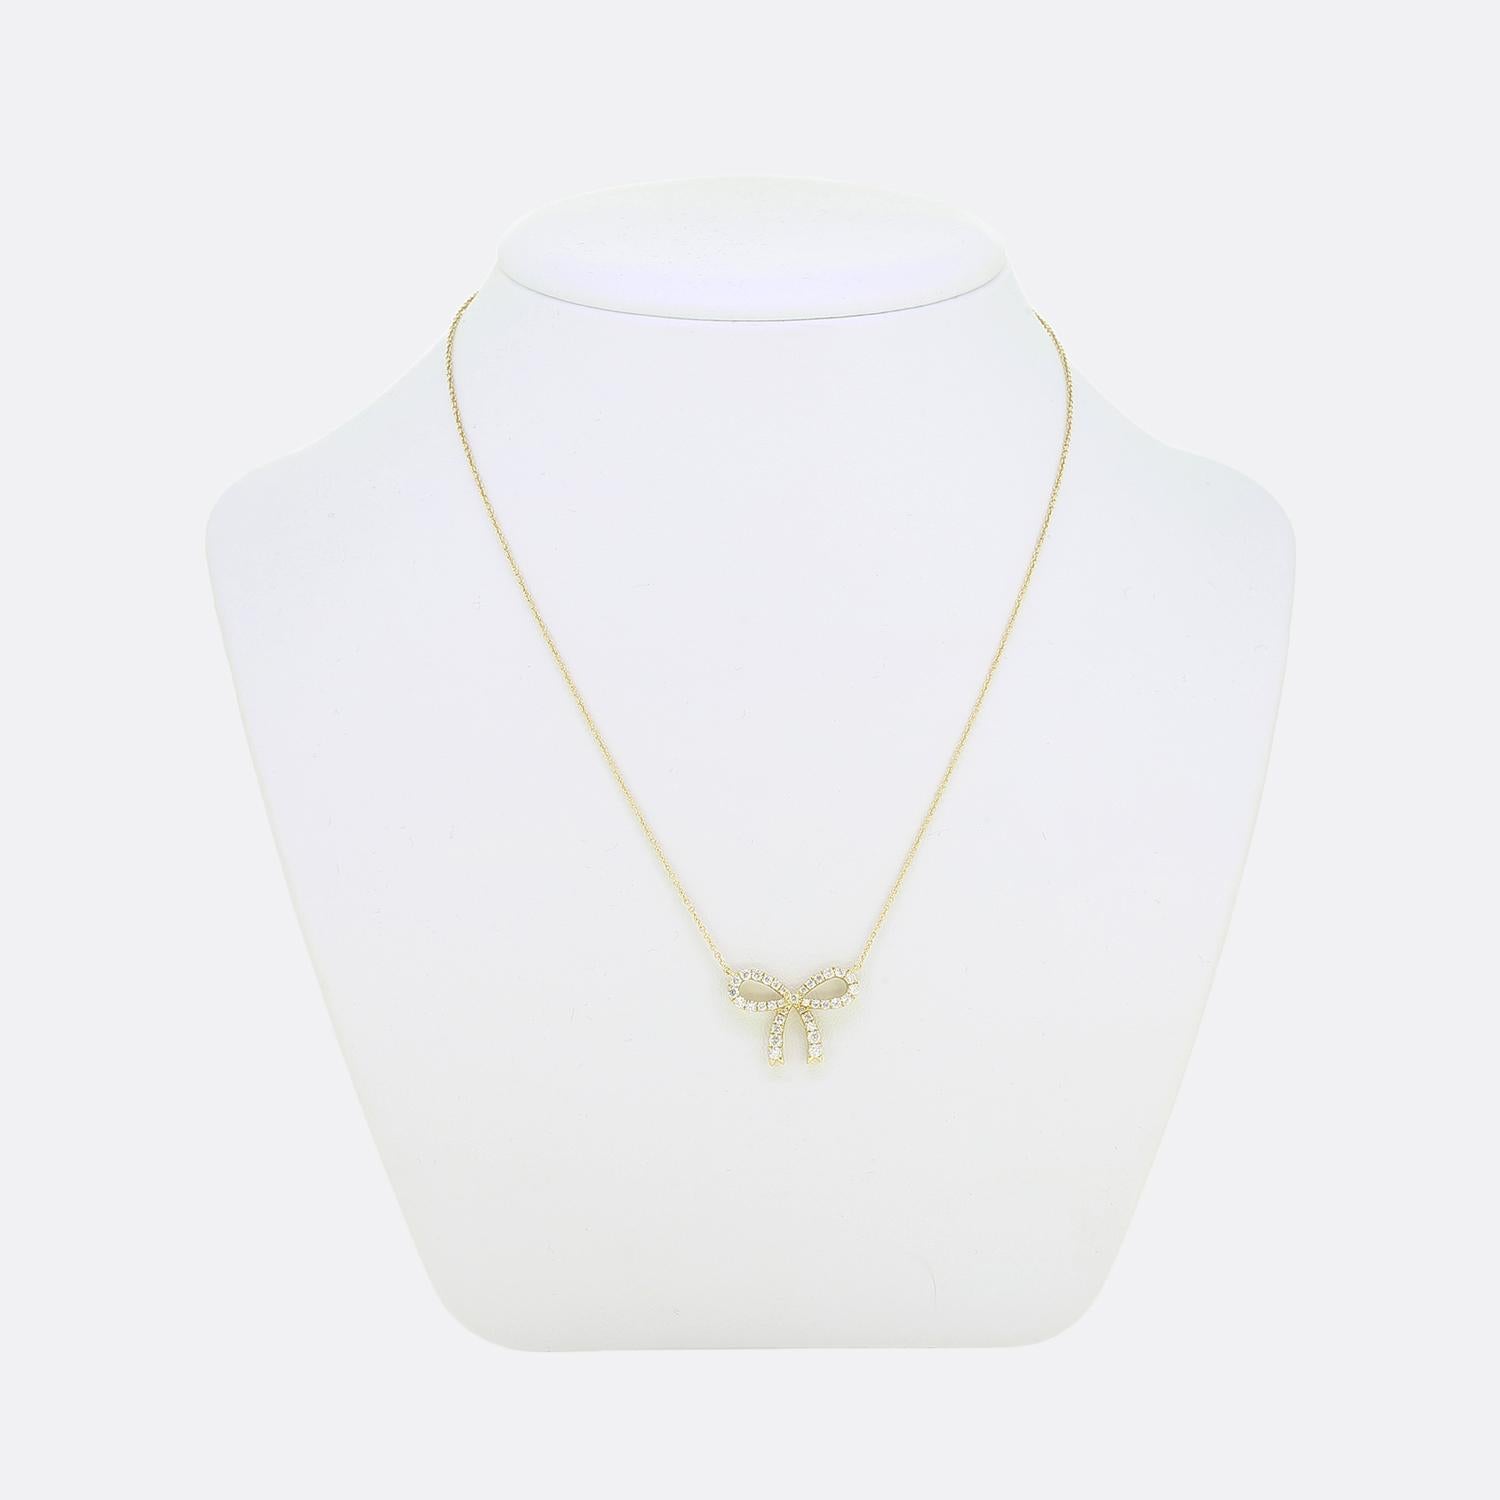 Here we have a lovely diamond necklace. This vintage piece has been crafted from 18ct yellow gold into the shape of a looped ribbon and adorned with a single row of round brilliant cut diamonds around the entire frame. This dazzling bow is then